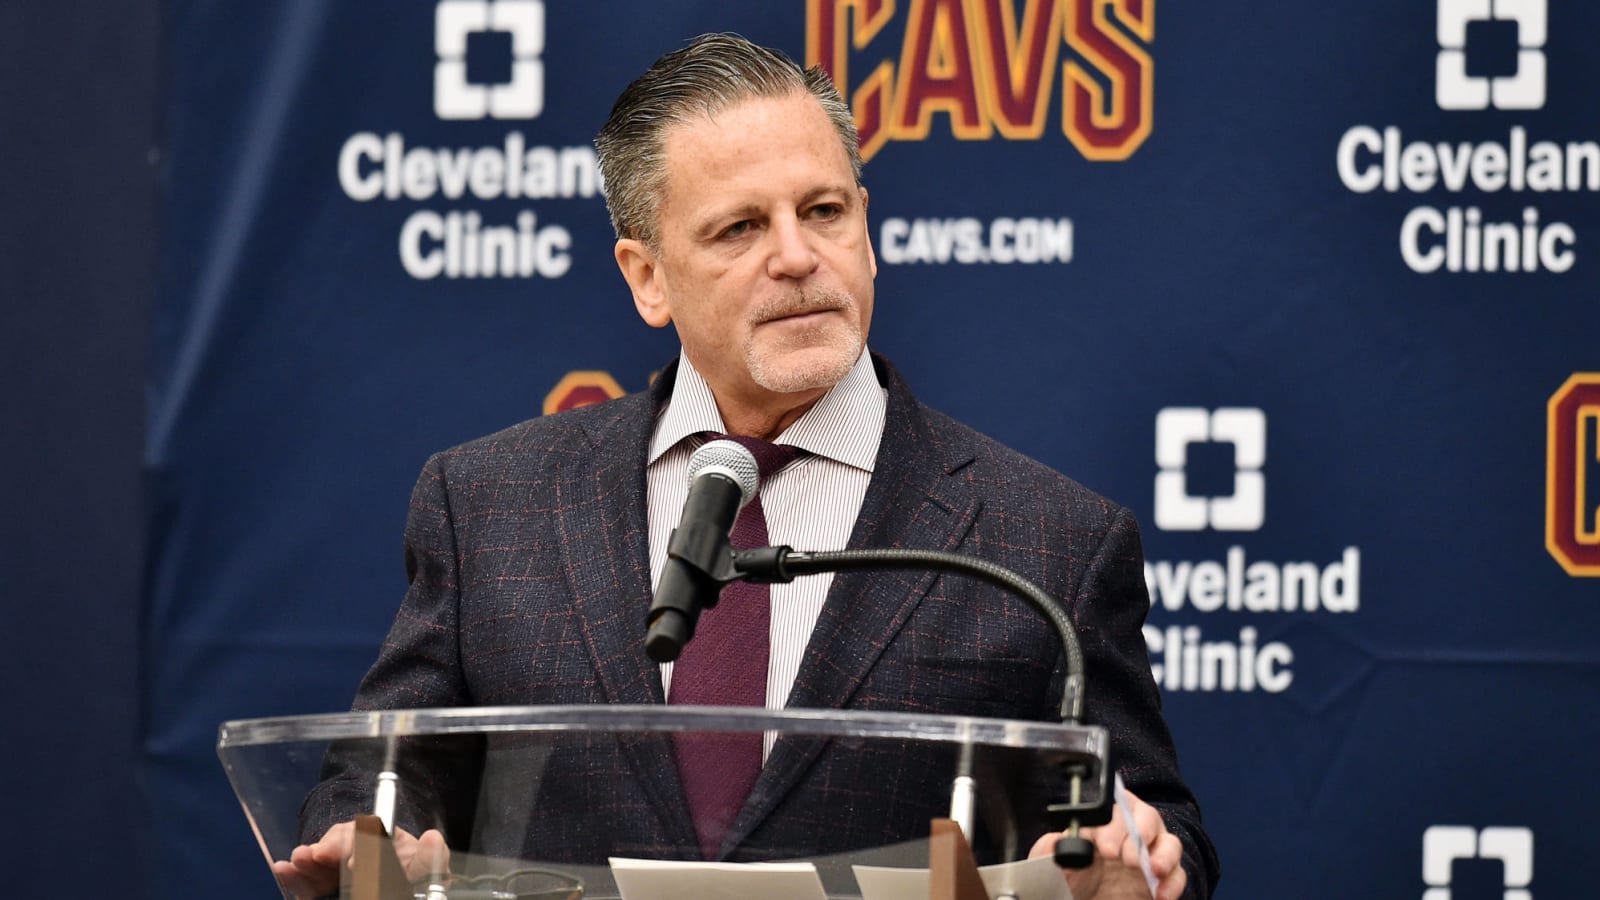 Rocket Mortgage IPO makes Cavs' Dan Gilbert second-richest owner in sports